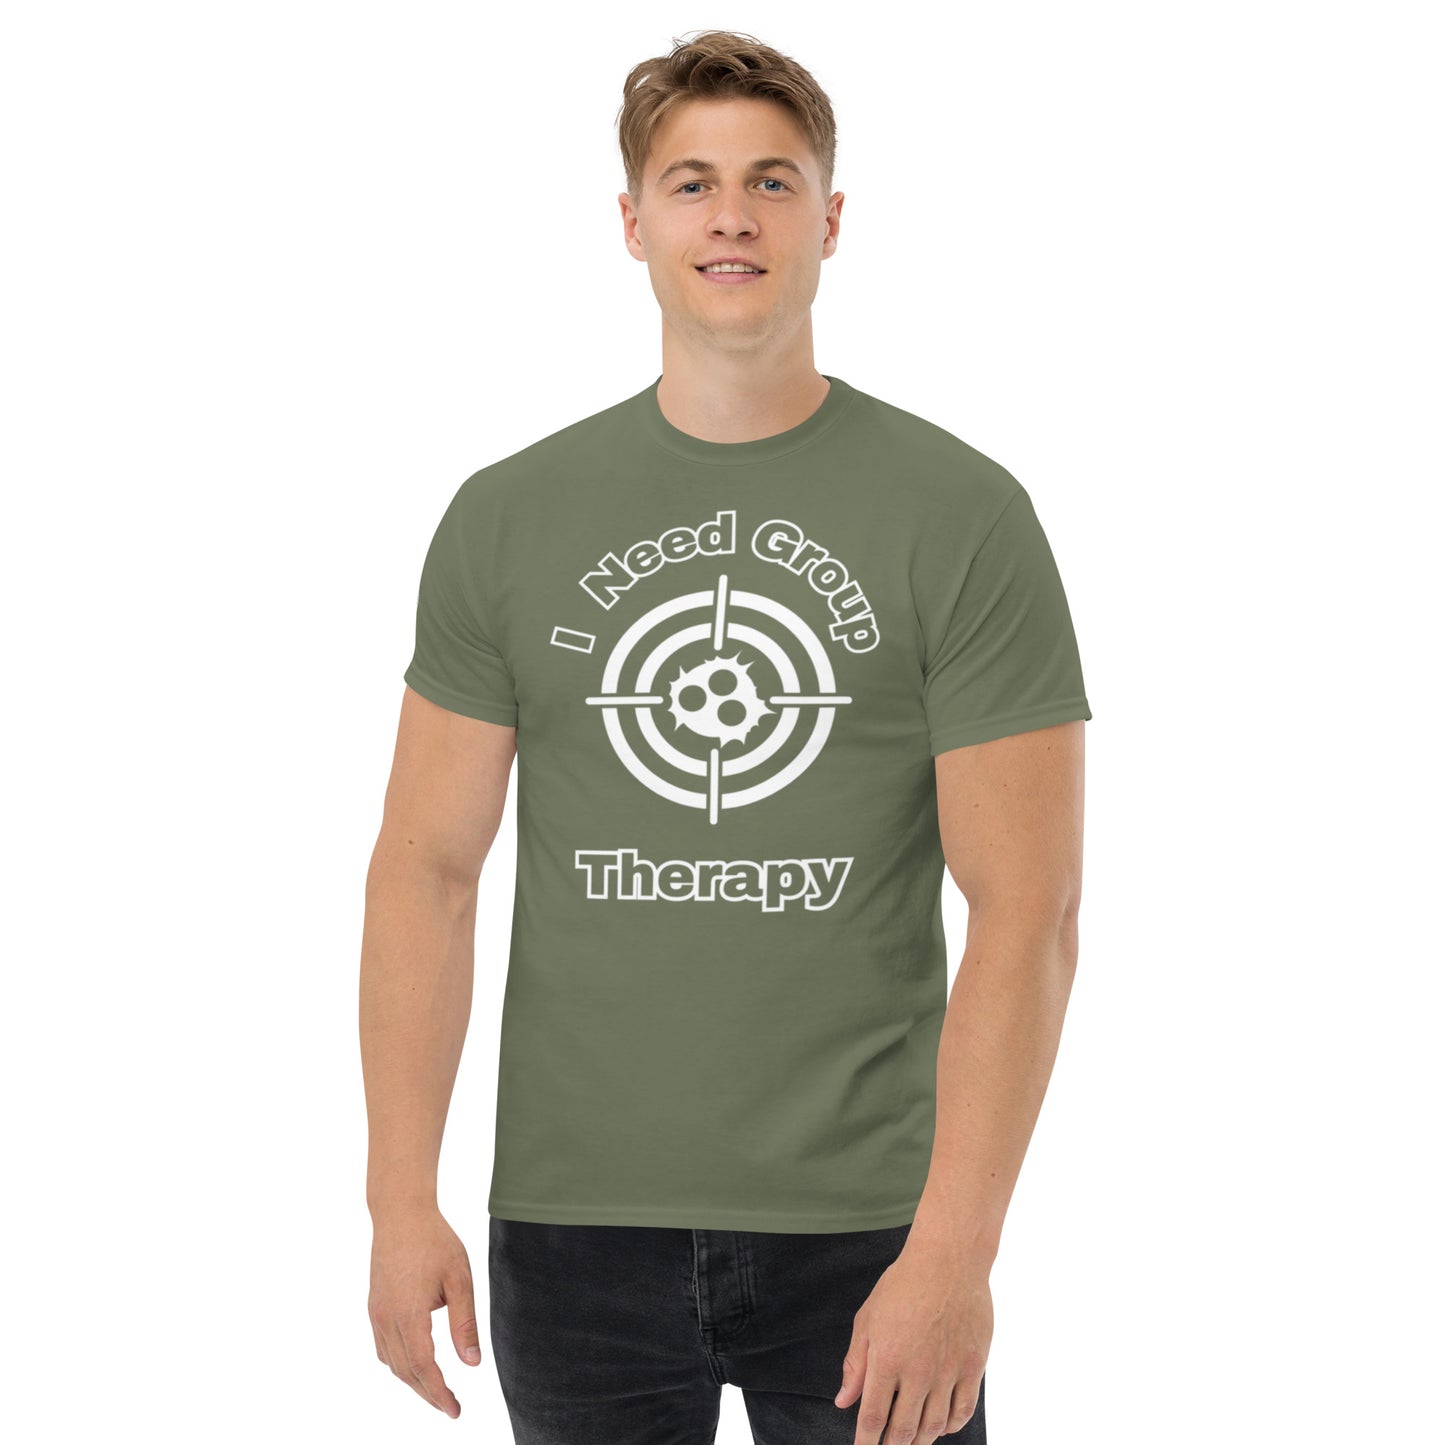 Men's classic tee " I Need Group Therapy "Show your Love of Range Time